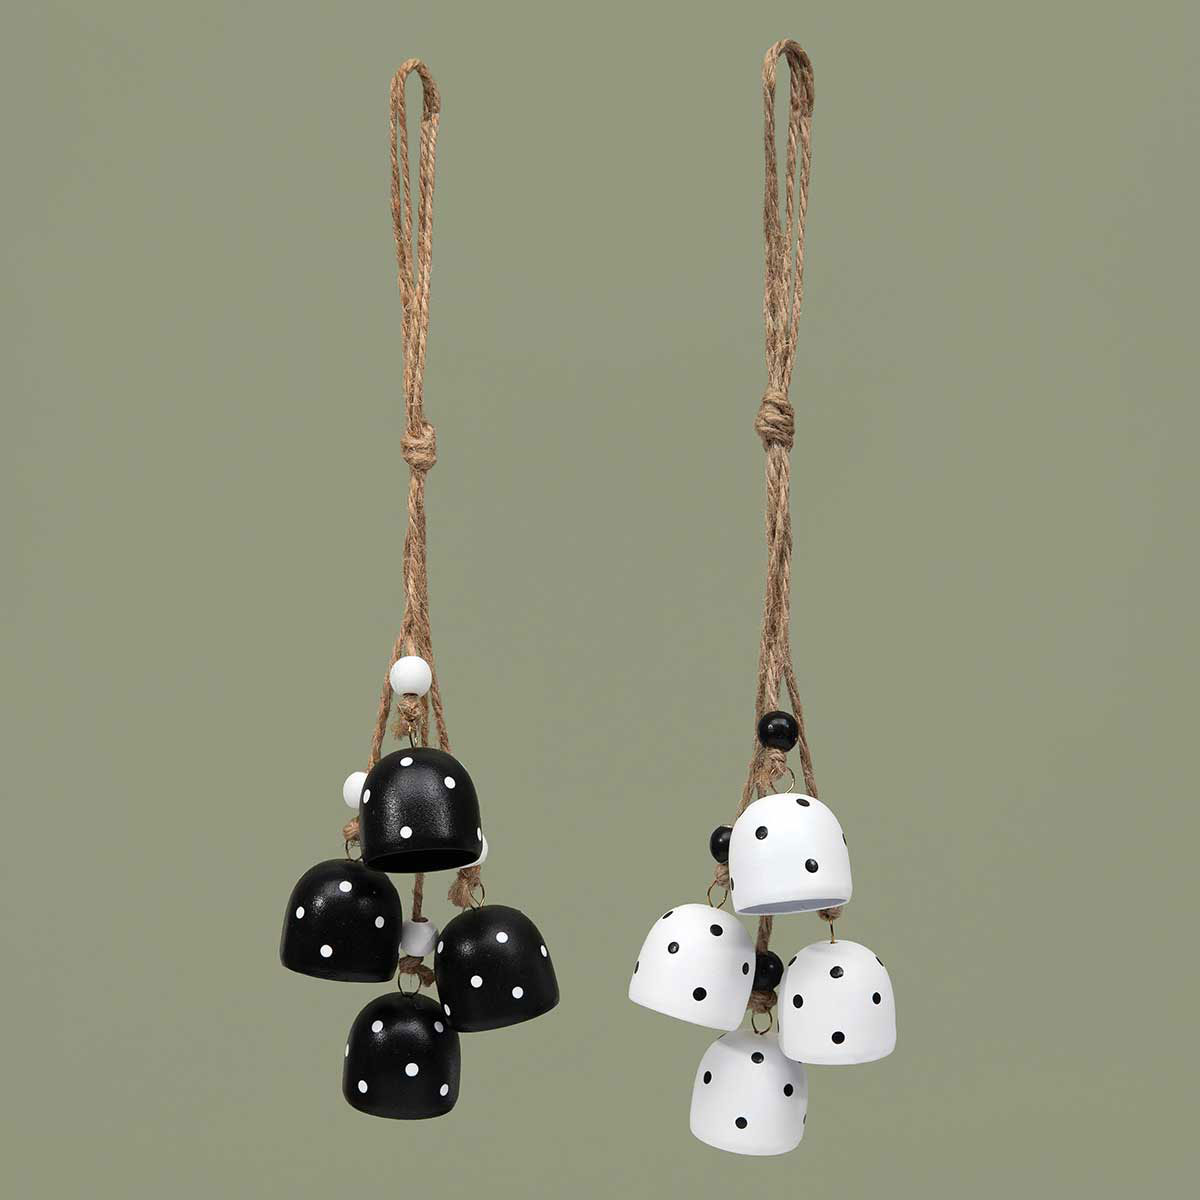 ORNAMENT HANG BELLS 2 ASSORTED 2IN X 11IN BLACK/WHITE METAL